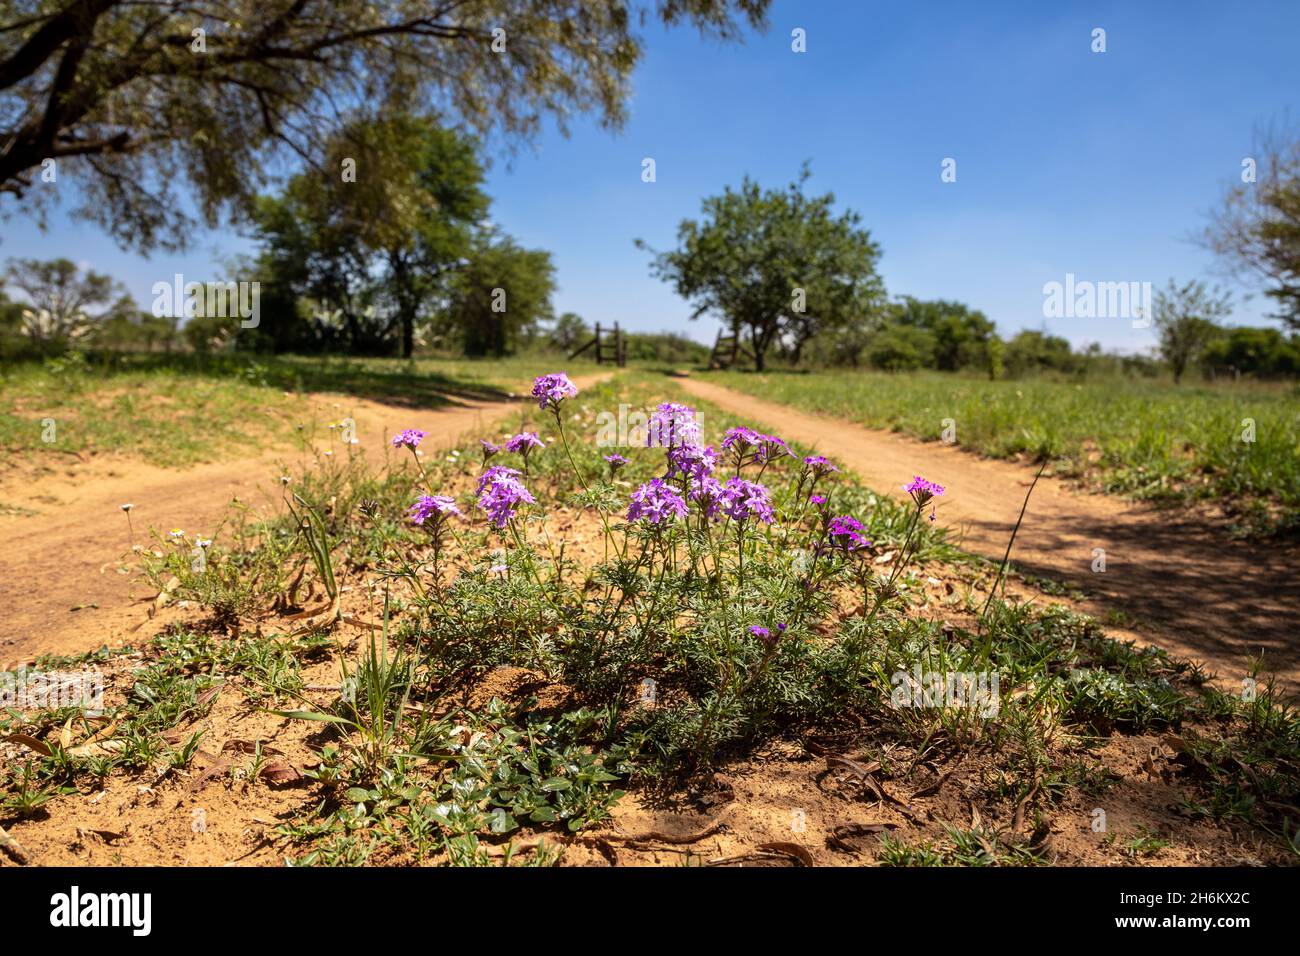 Selective focus on purple flowers in the foreground with a landscape scene out of focus in the background Stock Photo